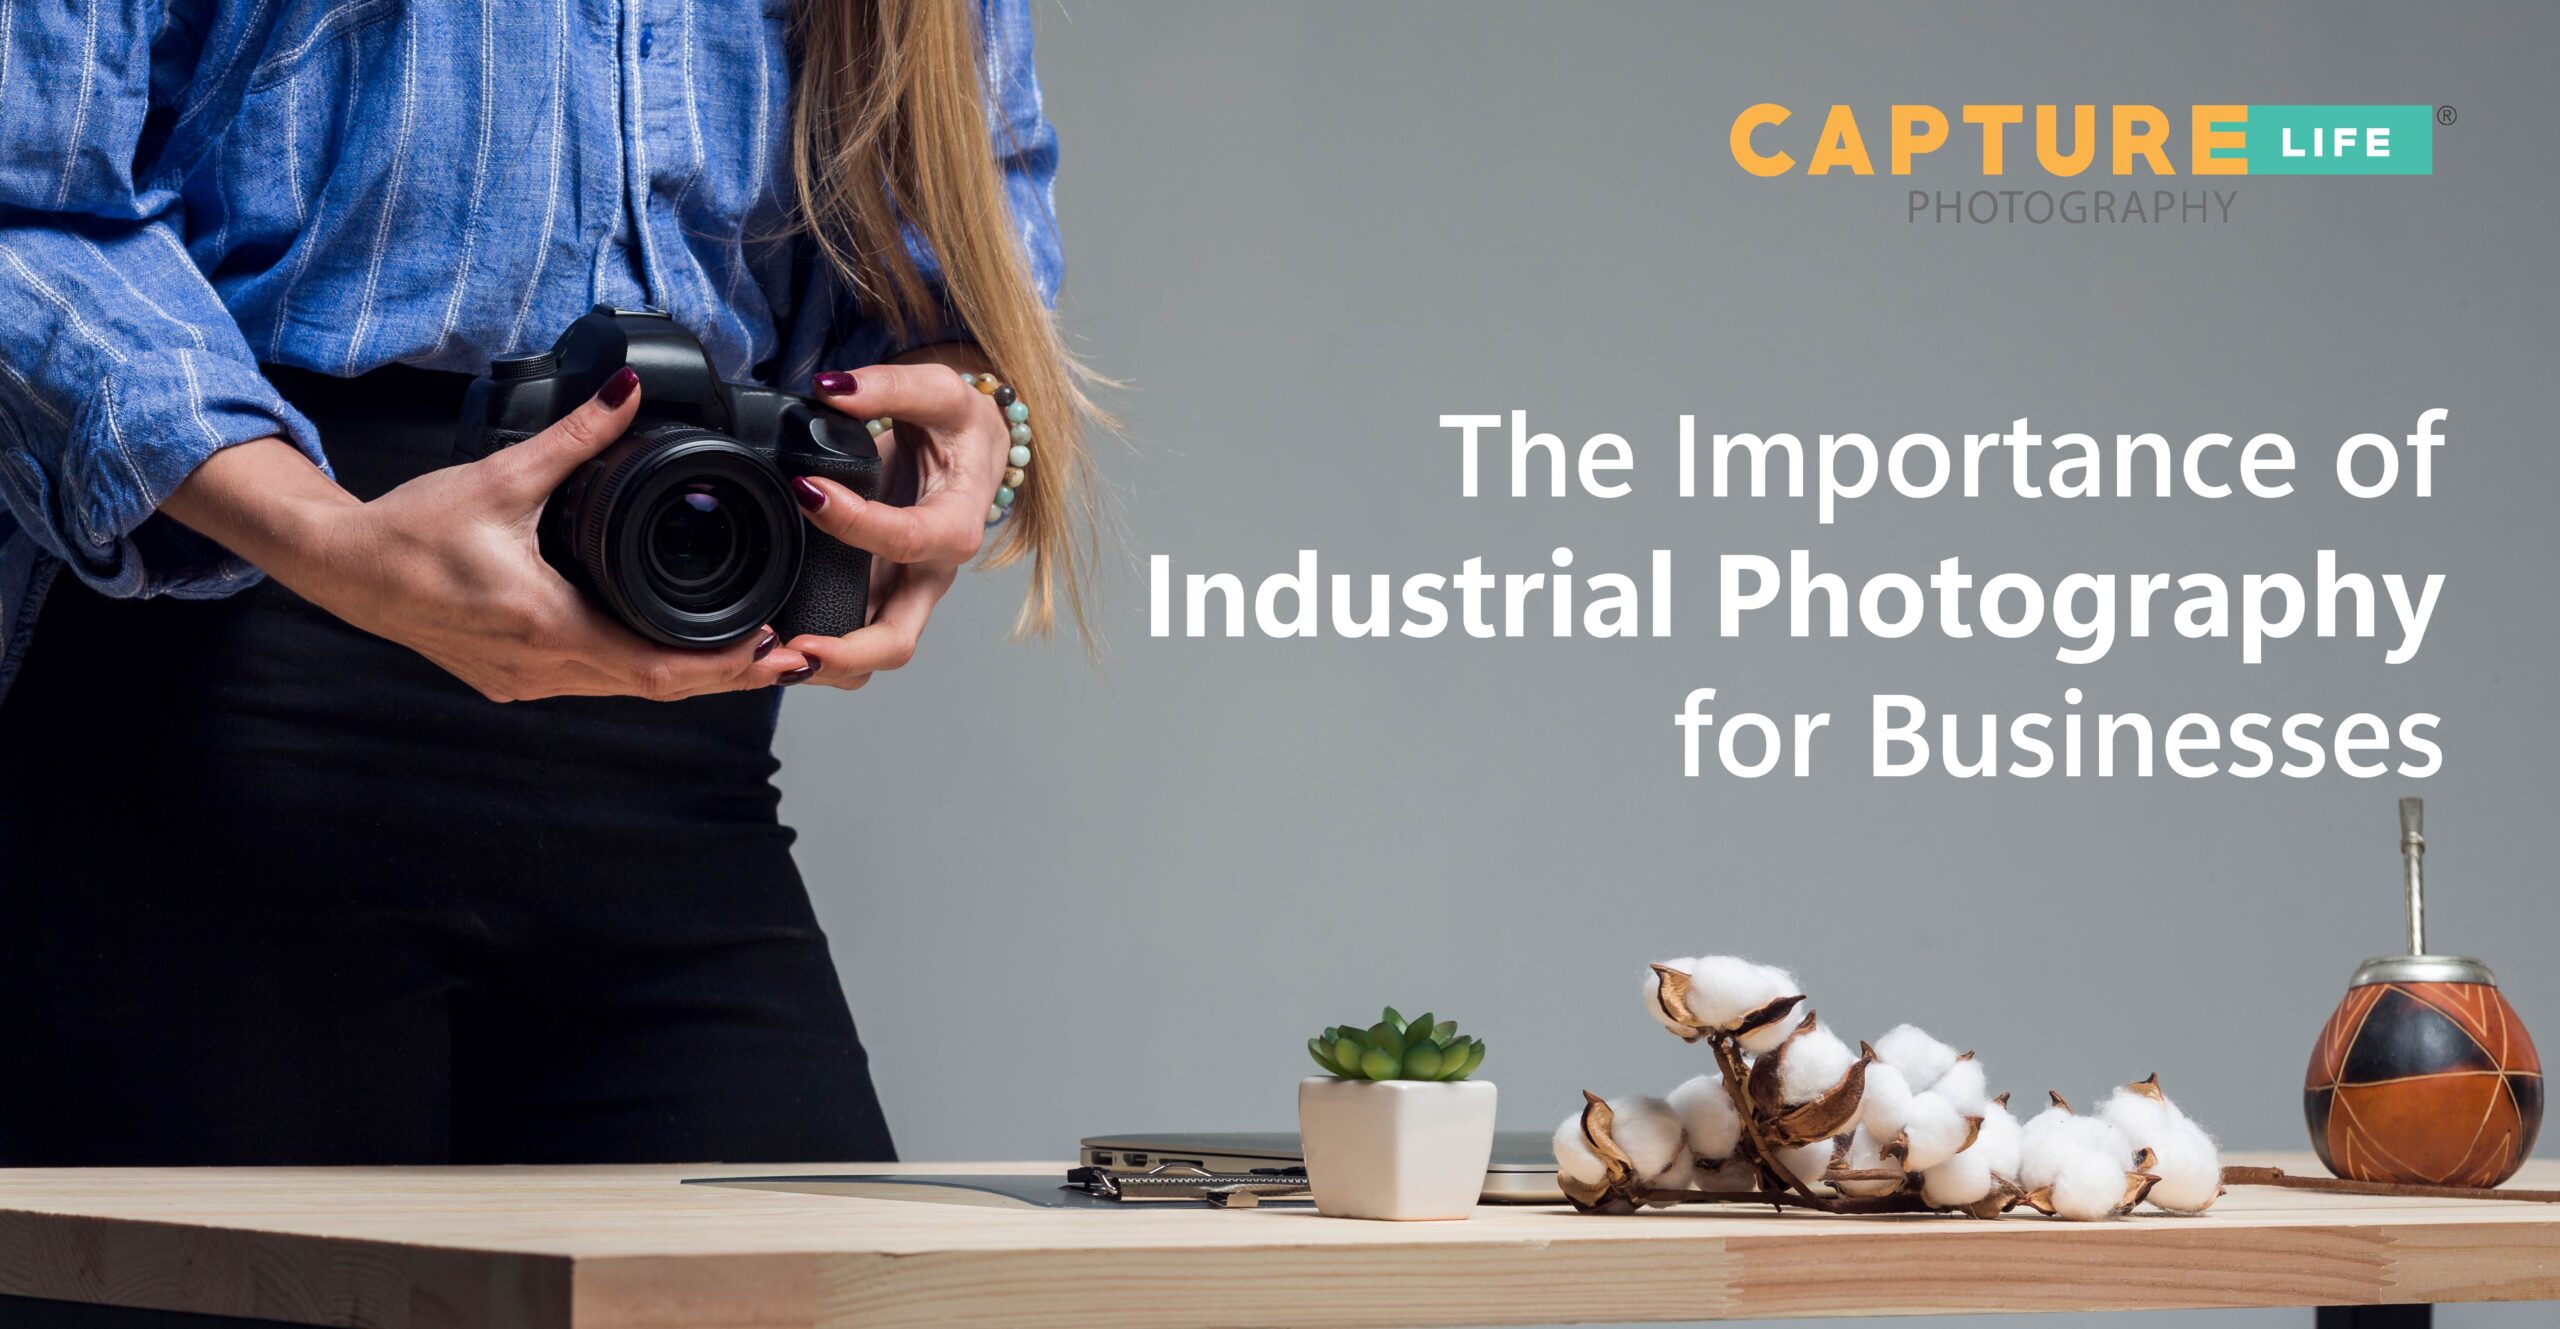 Industrial photography for businesses